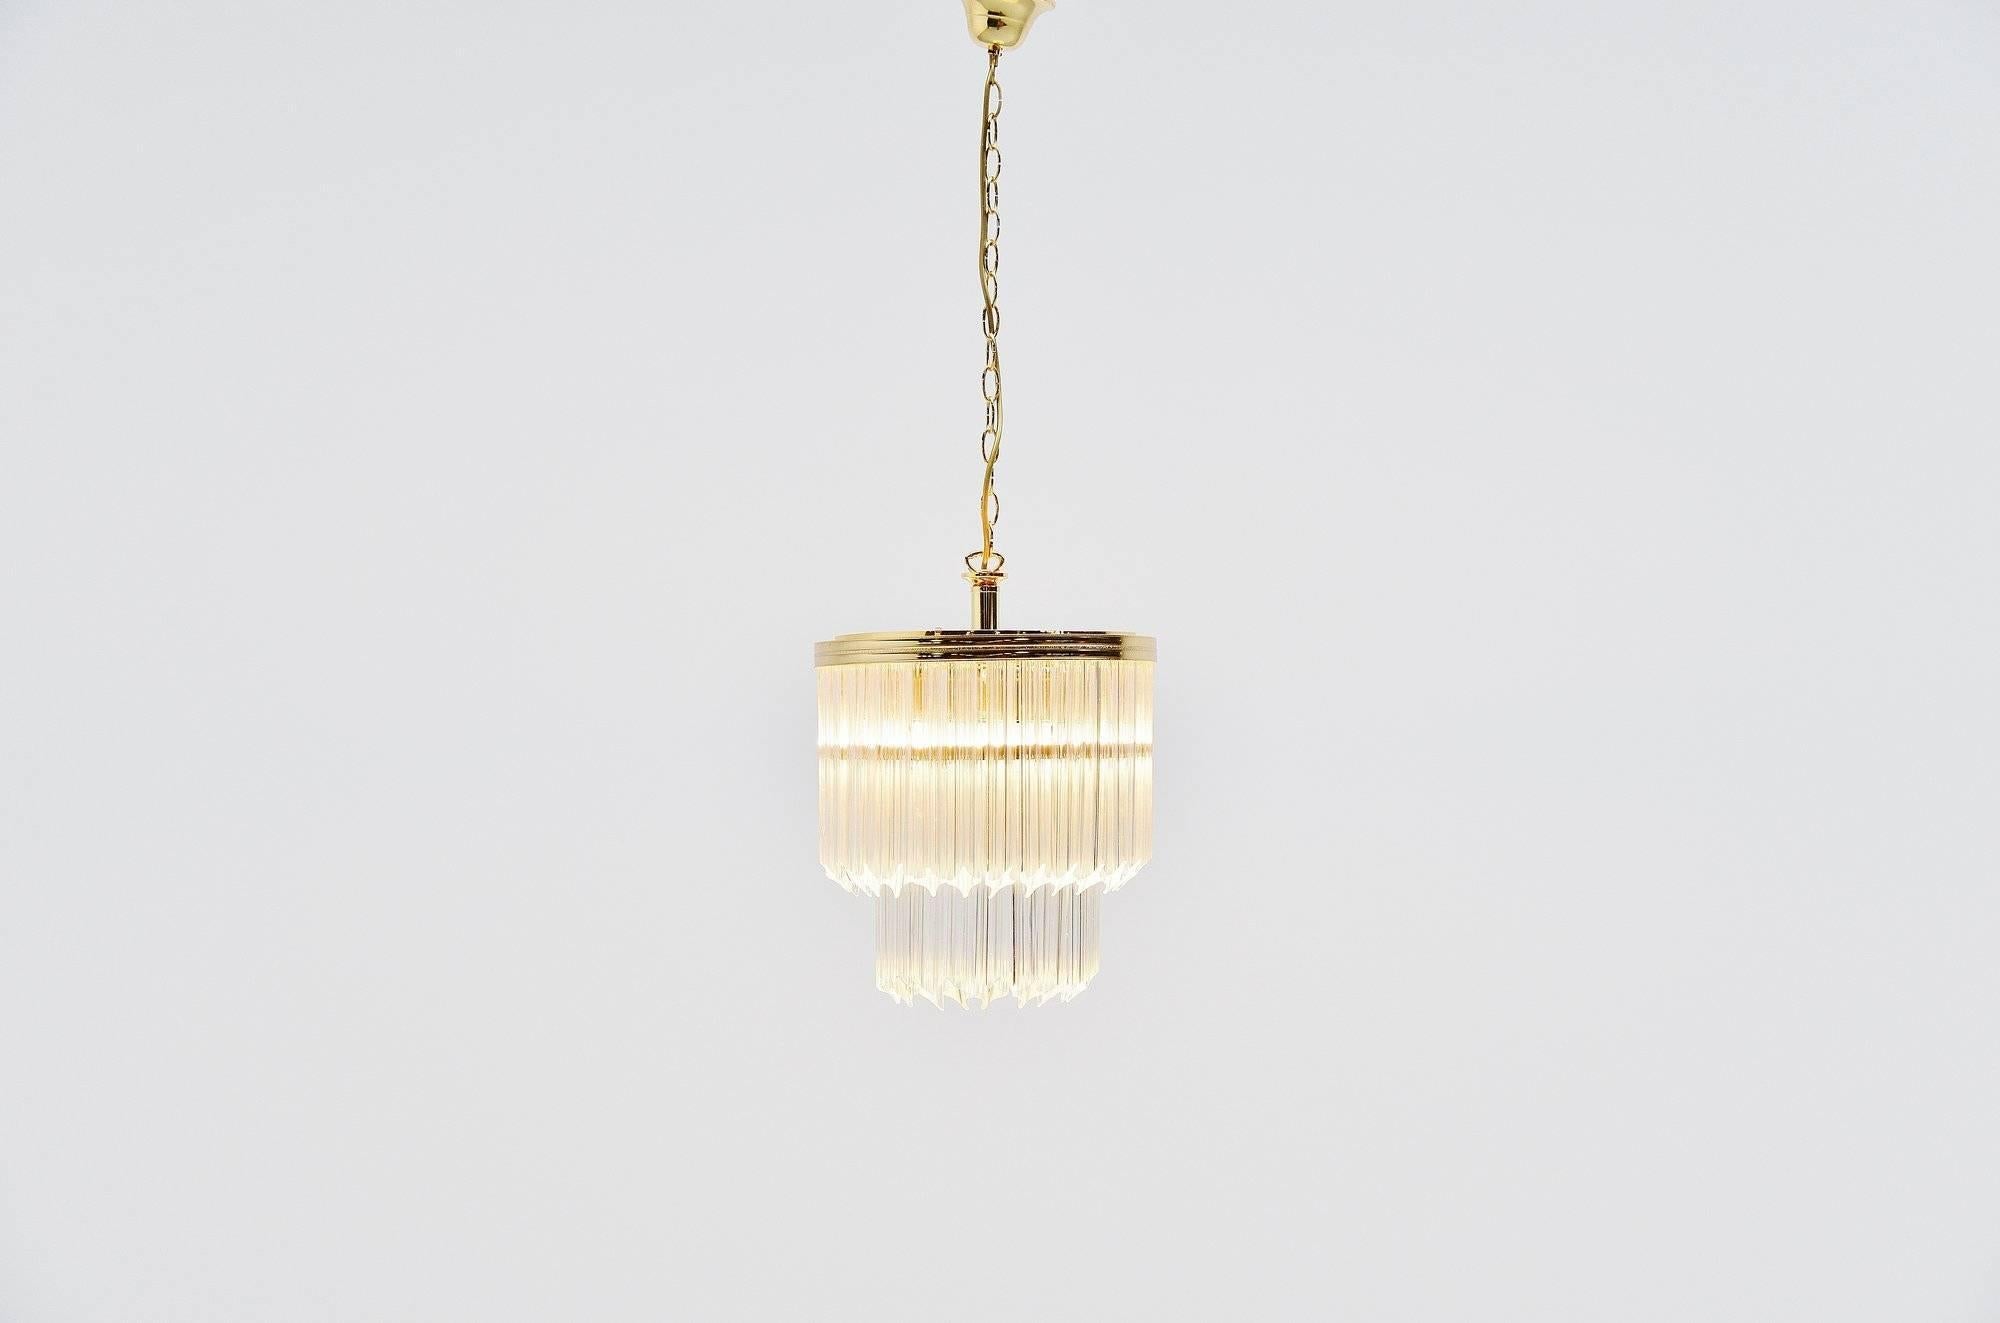 Super decorative chandelier designed by Paolo Venini and manufactured by Venini Murano, Italy, 1960. This nice sized chandelier has a brass hanging fixture and glass Venini bars, model asta quadrilobo. The lamp gives very nice and warm light when